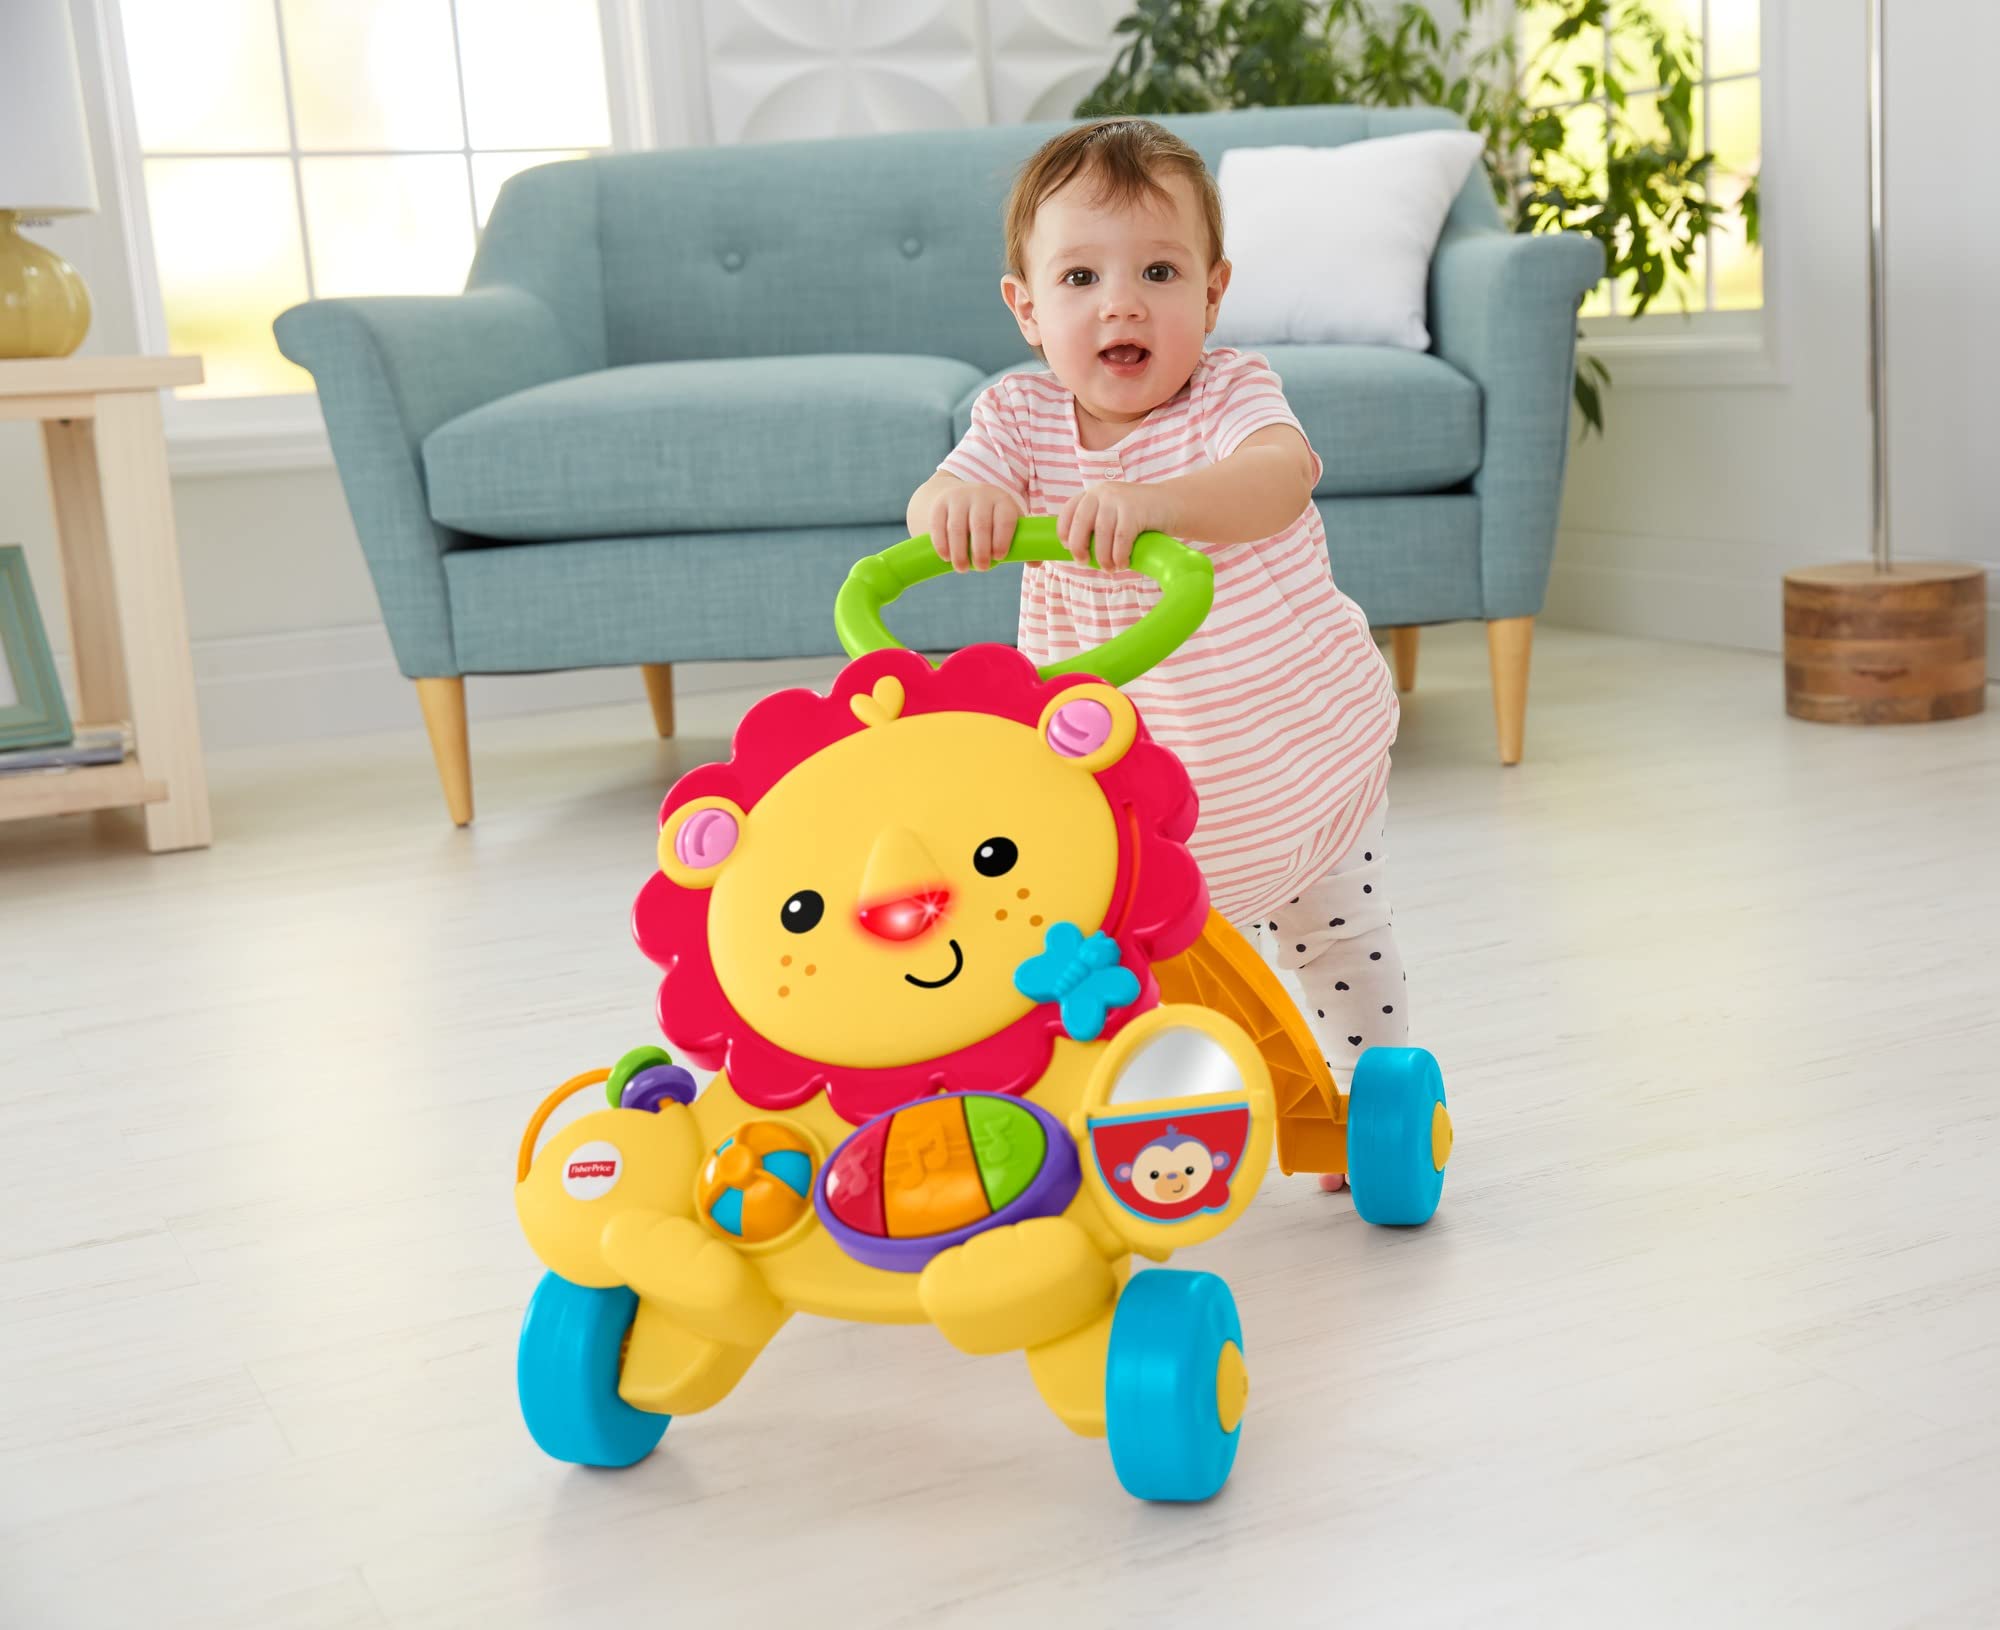 ALT Text: Baby girl pushing toy walker